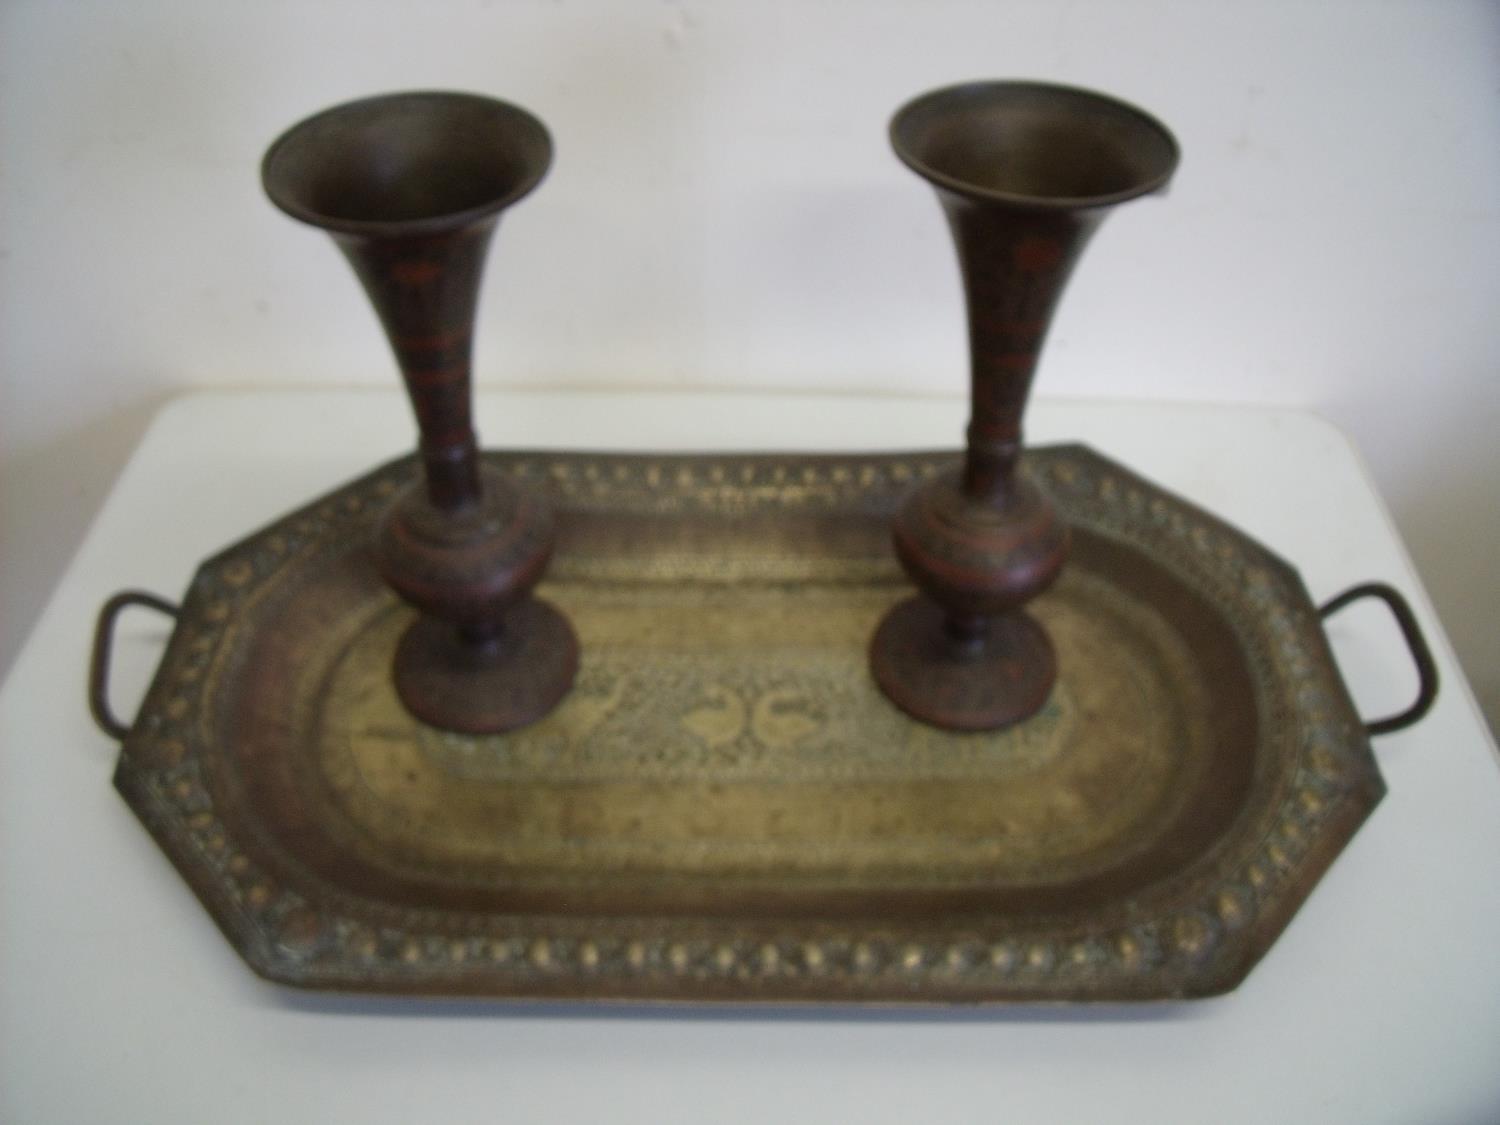 Rectangular twin handled Indian style brass tray with embossed detail and a pair of flared top vases